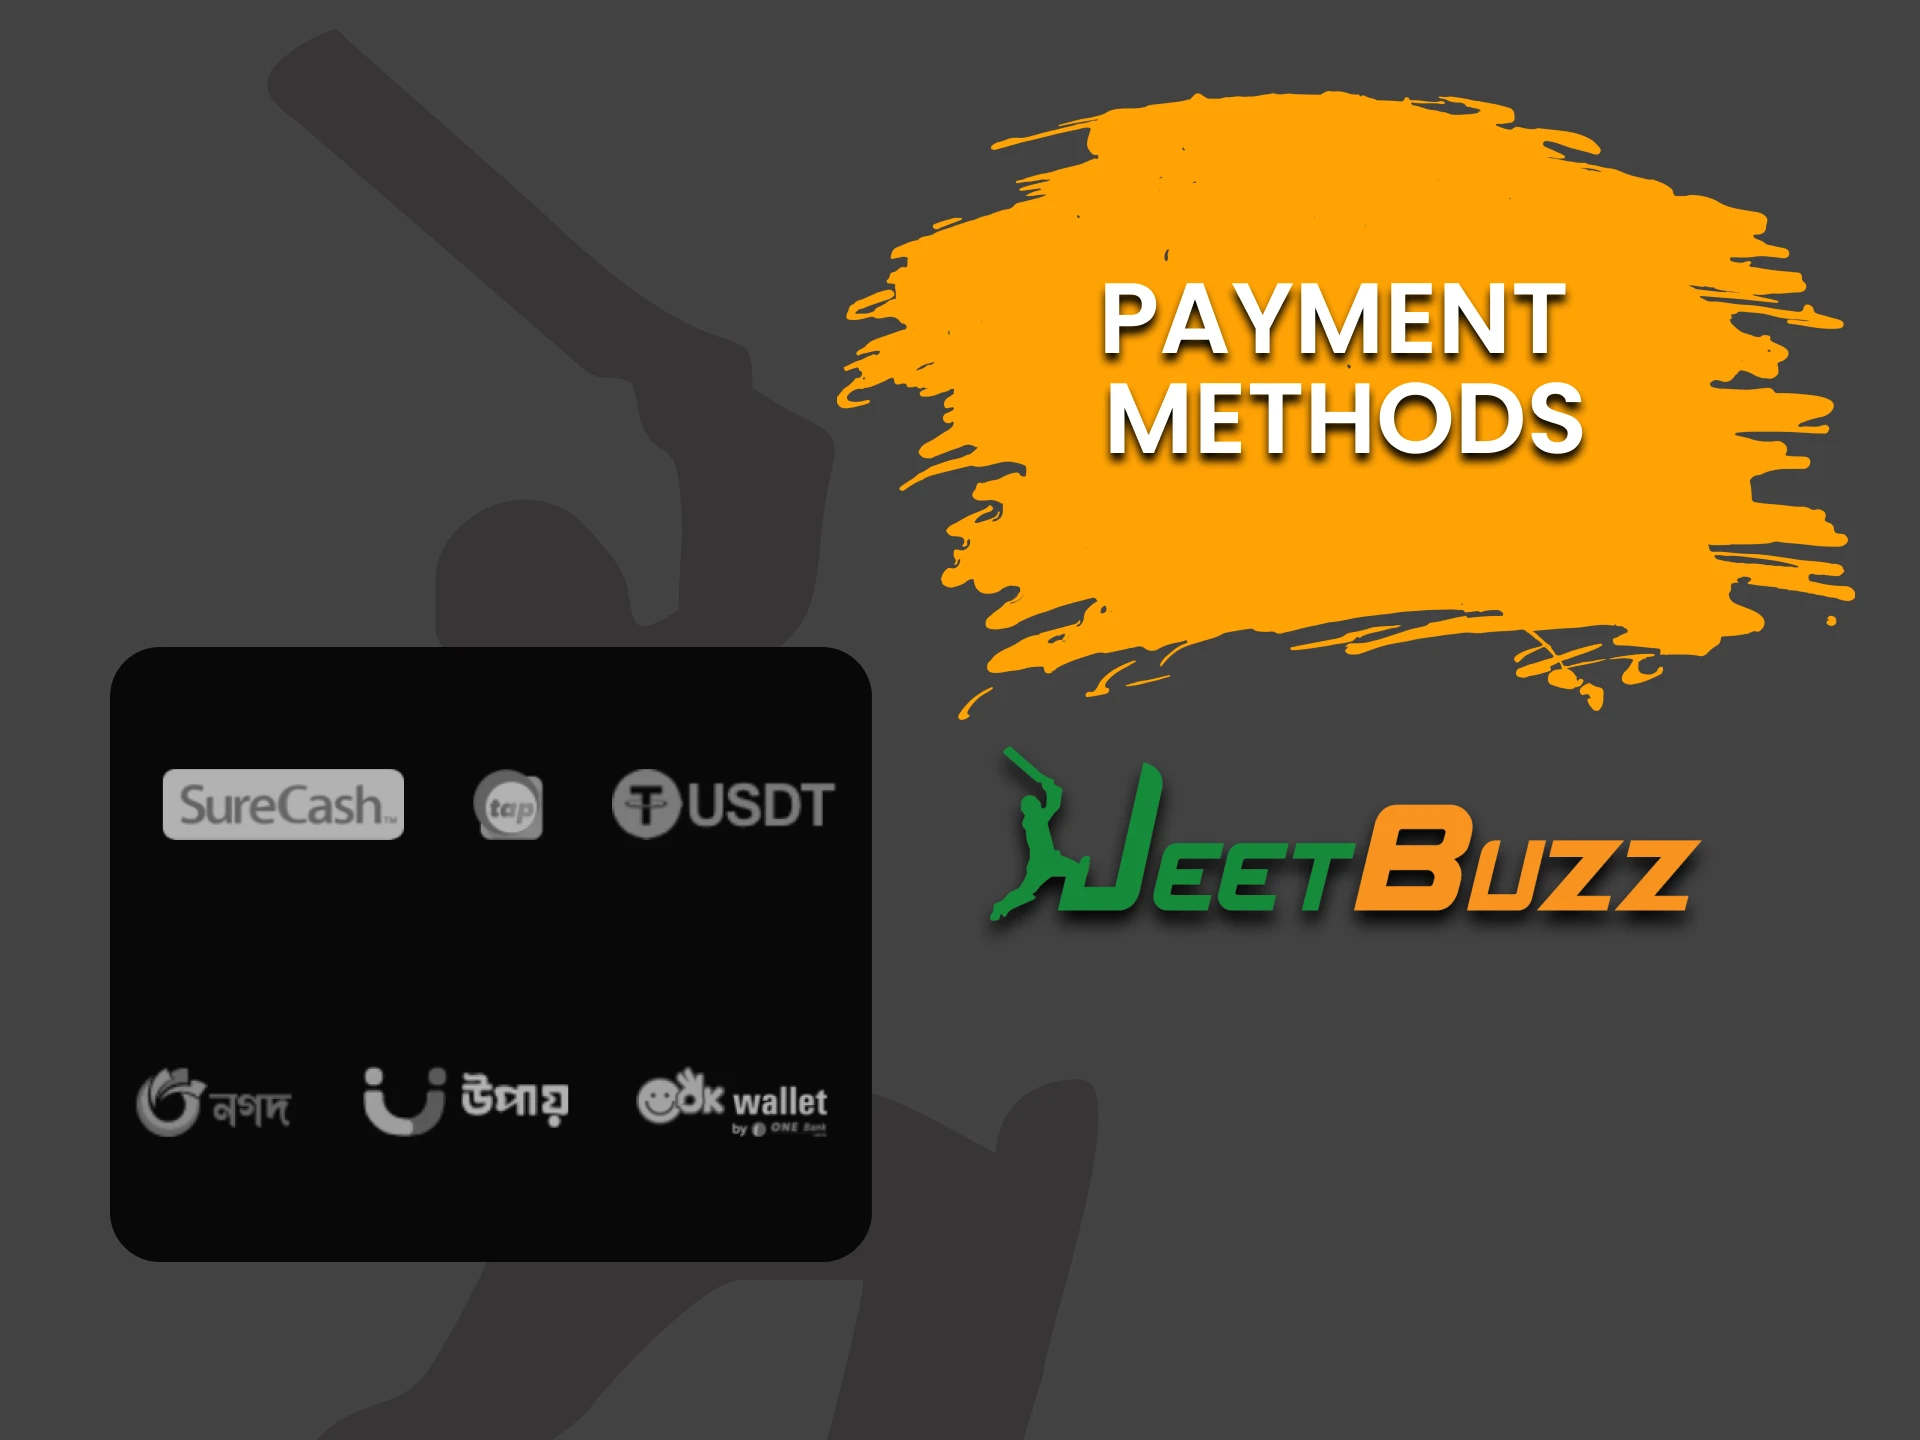 The JeetBuzz app has a variety of transaction methods.